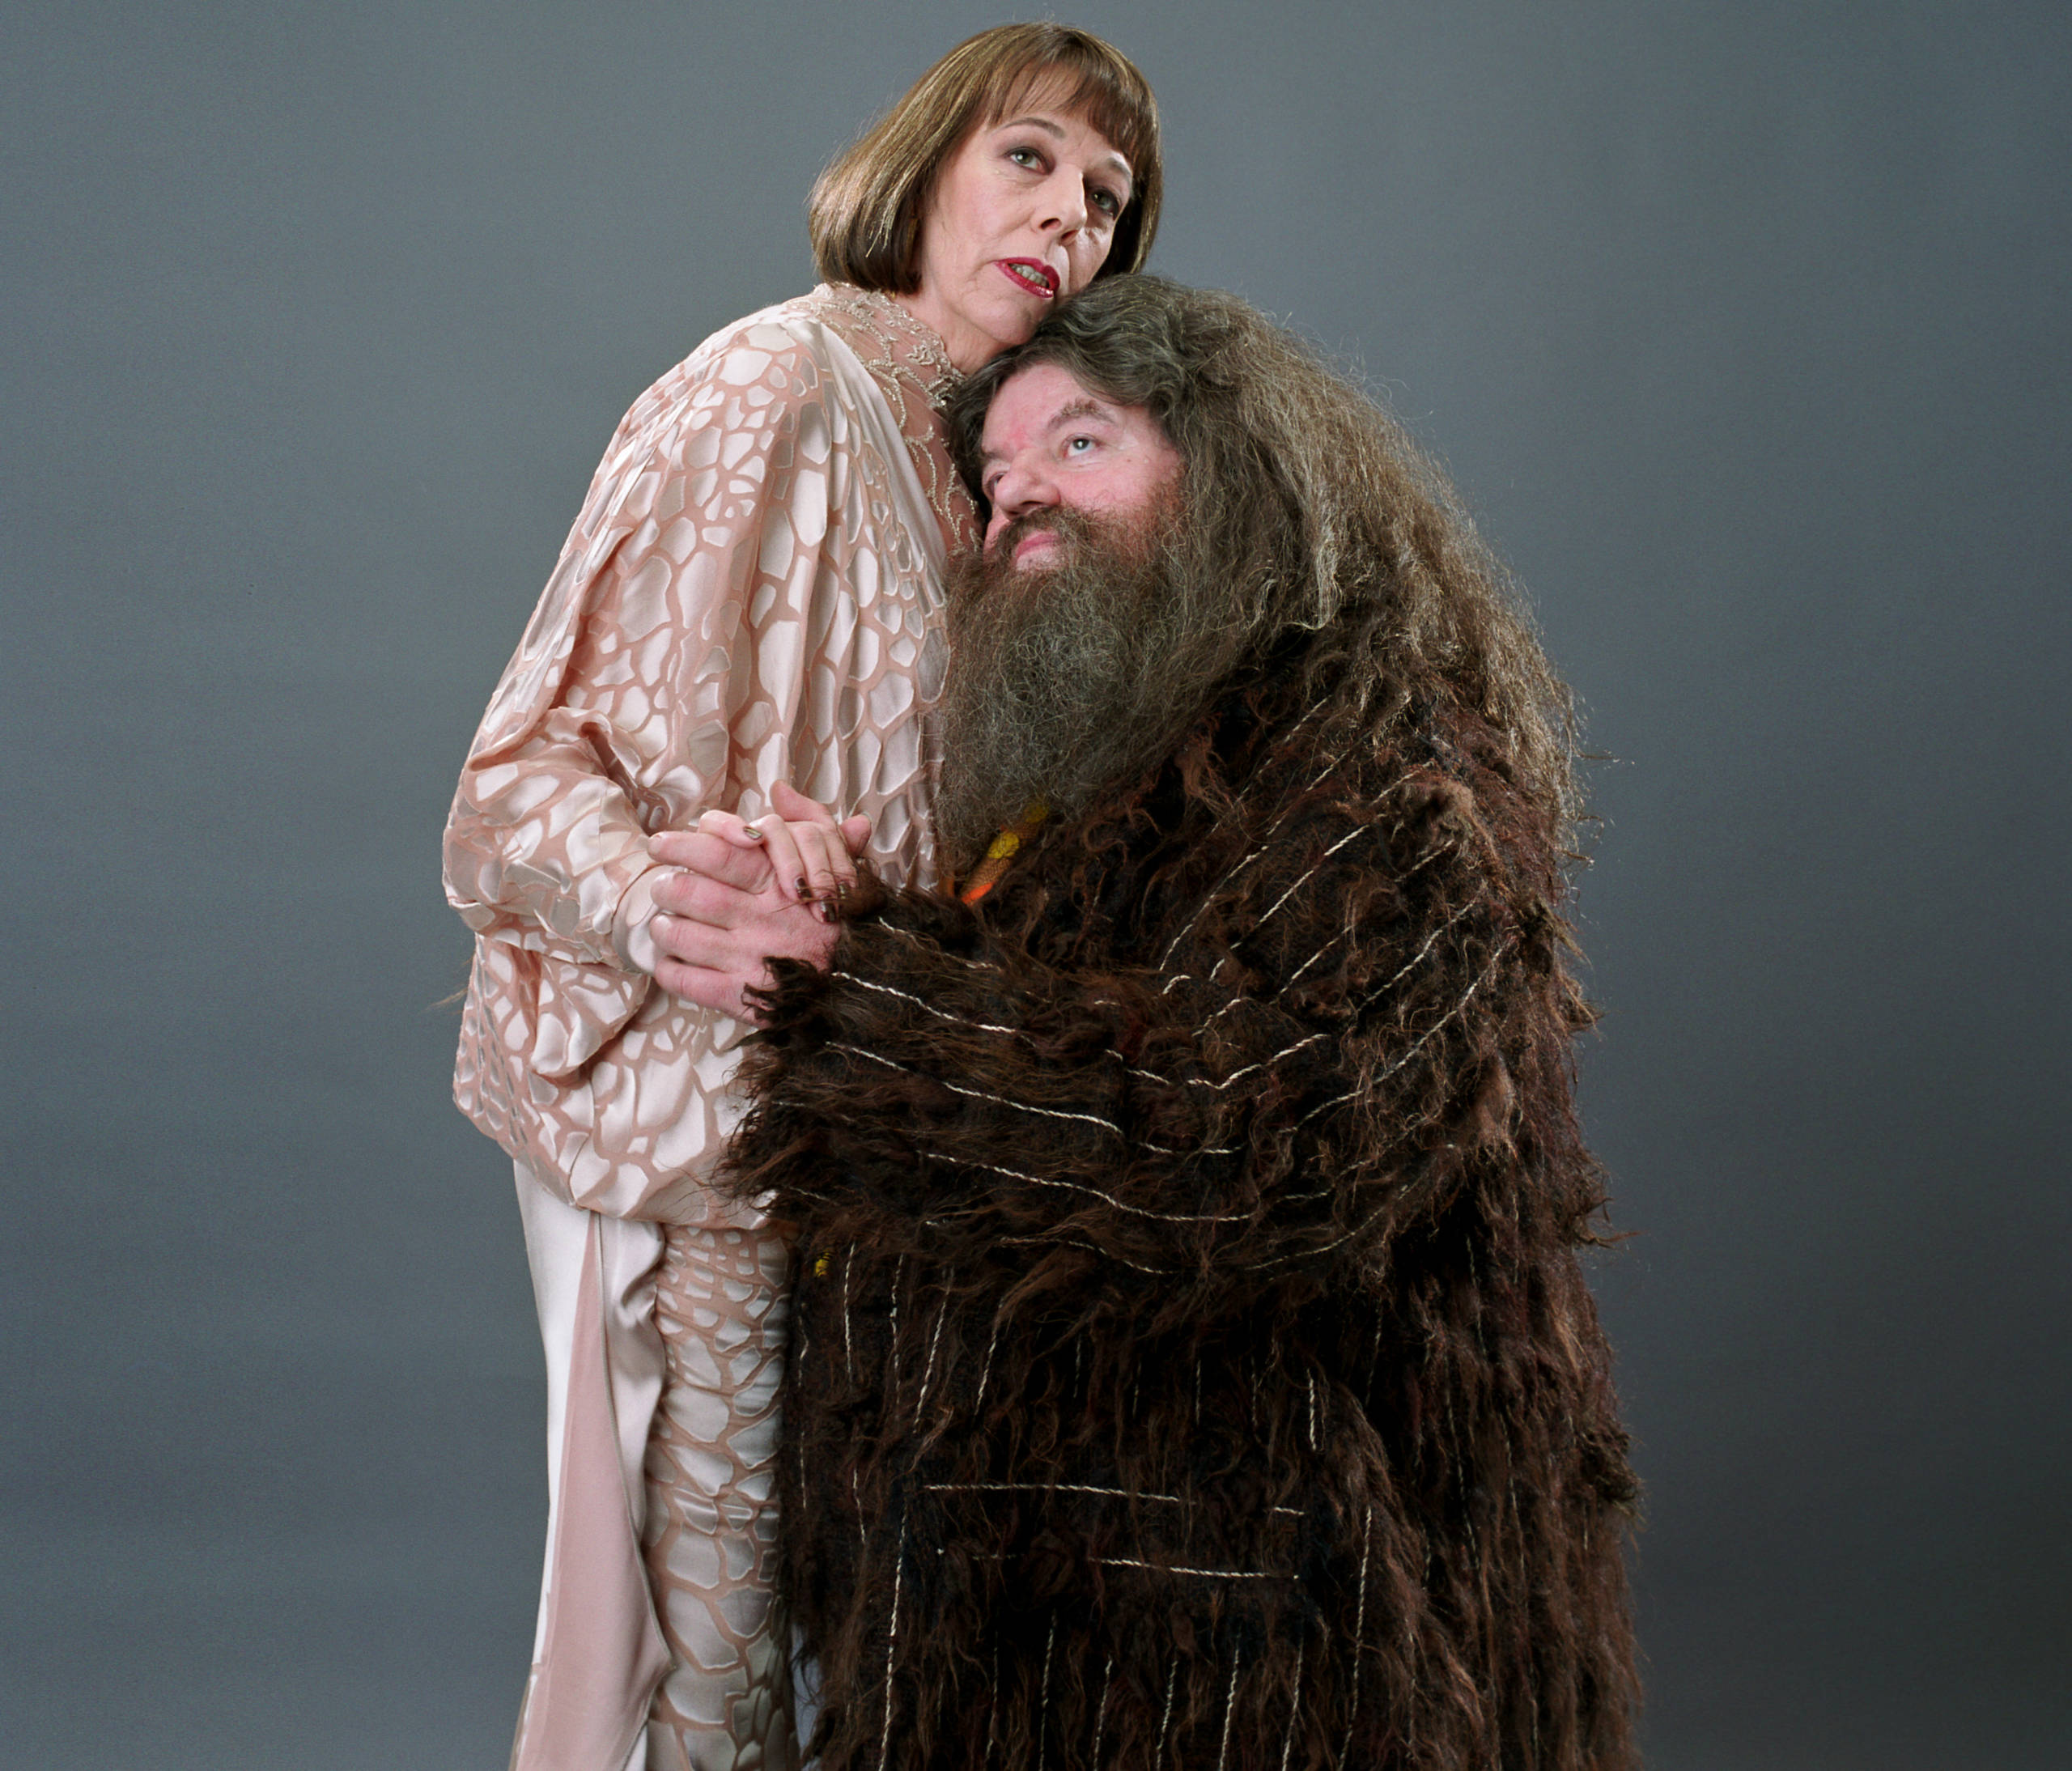 Hagrid and Madame Maxime slow dance together.